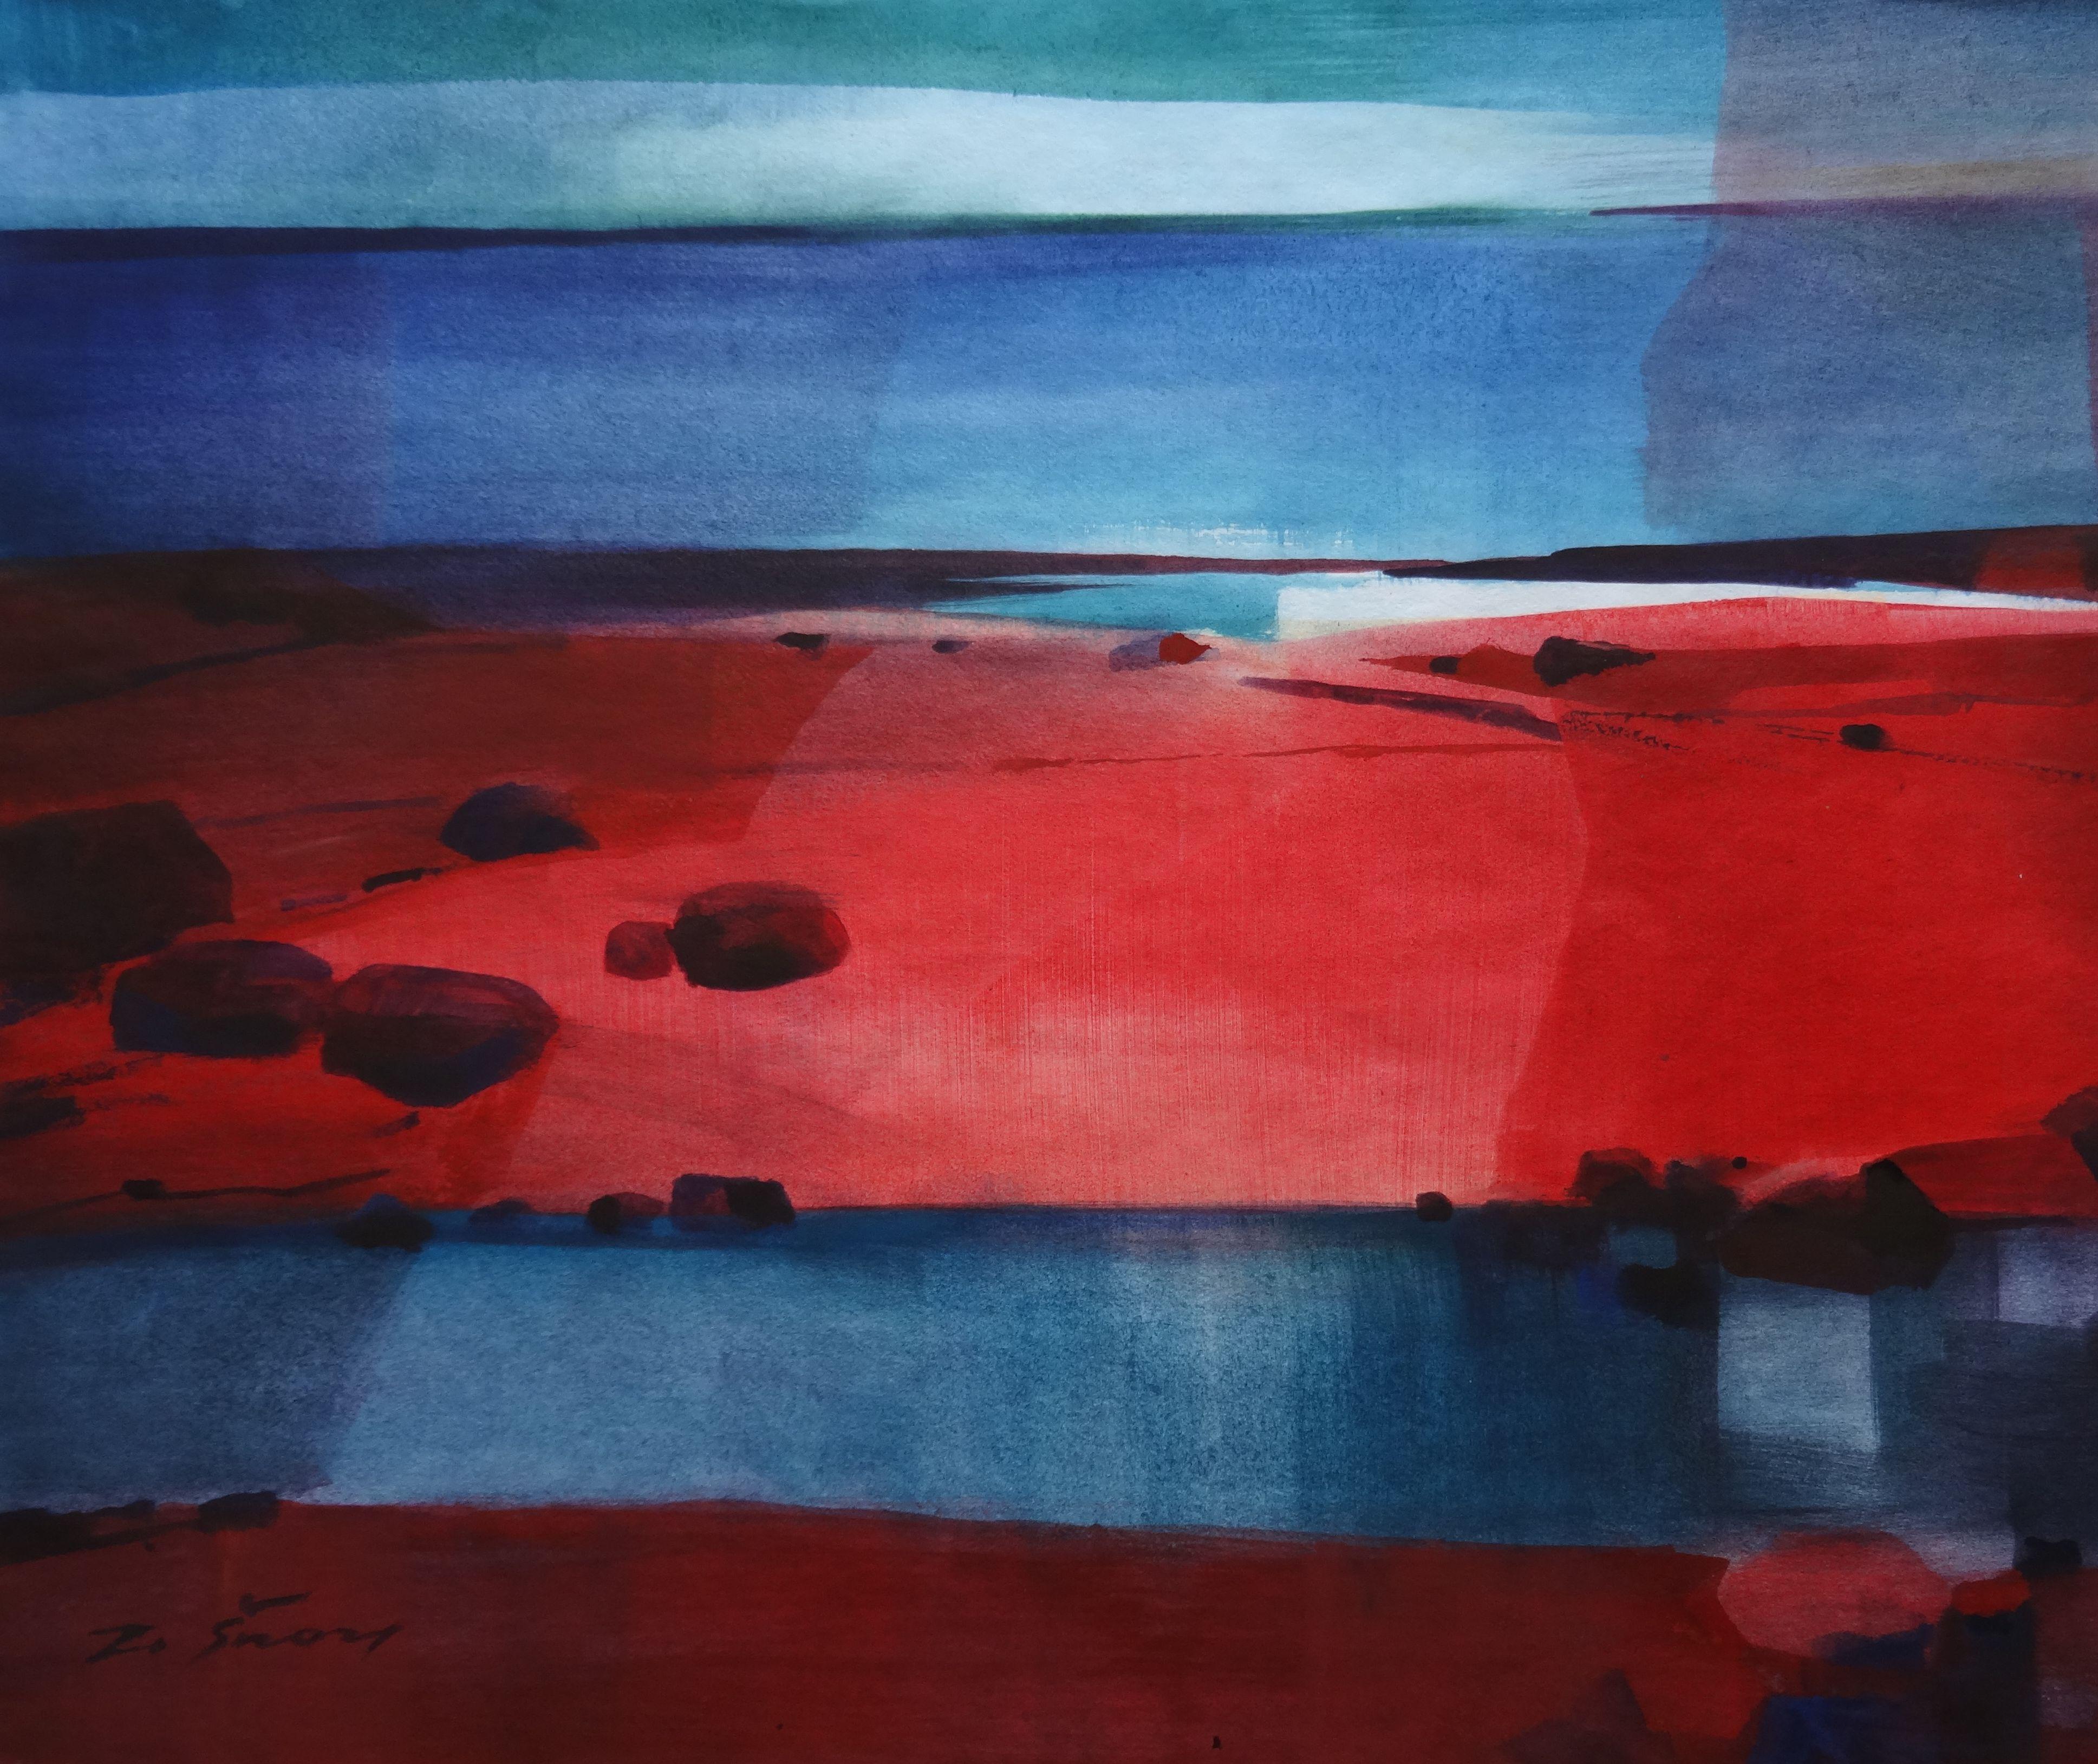 Zigmunds Snore  Landscape Painting - Small town. Red-blue mood. 2020. Watercolor, paper, 60, 5 x 71, 5 cm